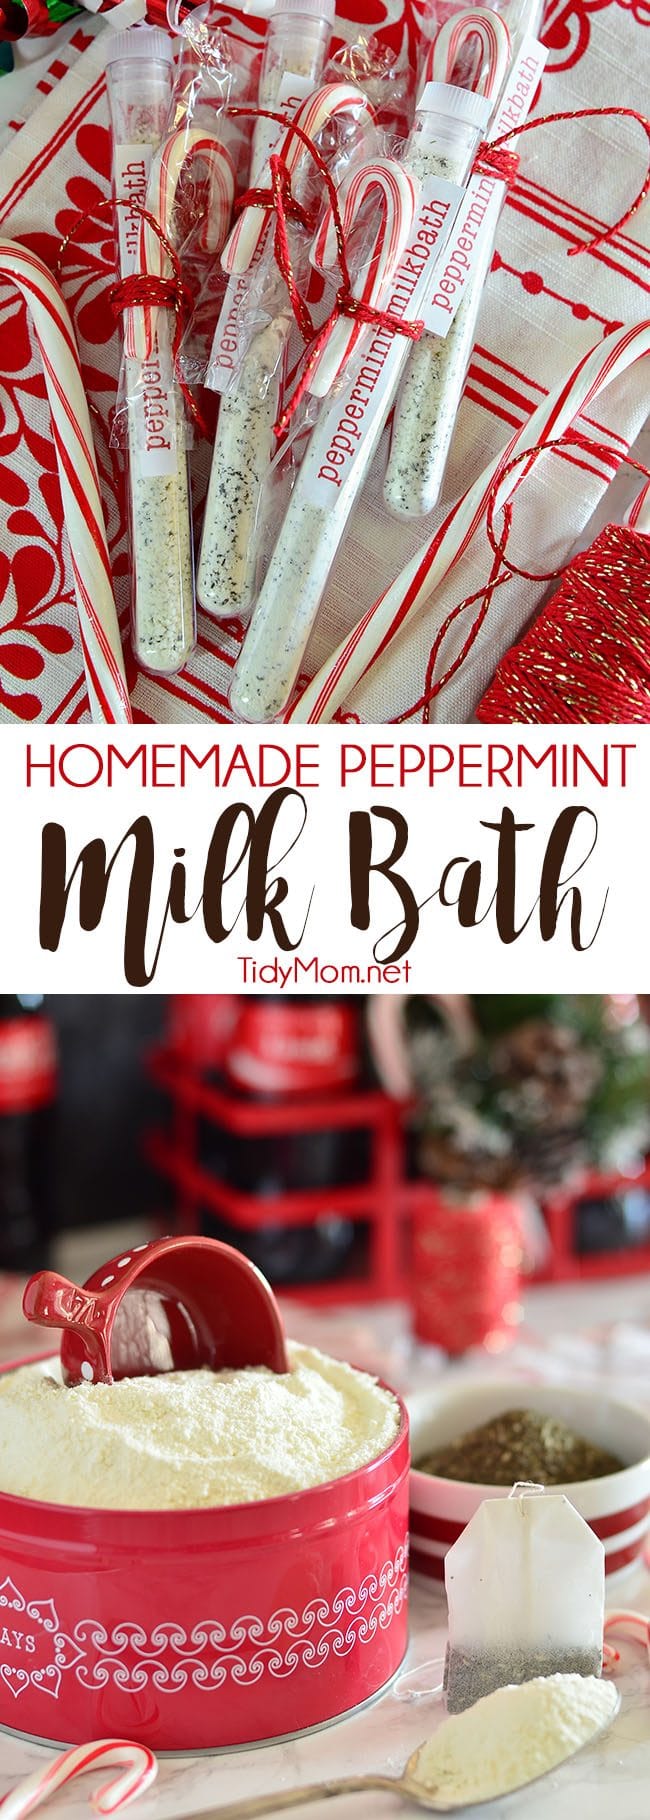 Milk has many beauty benefits. A simple milk bath can moisturize and soften your skin. With just a few ingredients, it makes an easy homemade gift. Homemade Peppermint Milk Bath recipe and gifting ideas at TidyMom.net